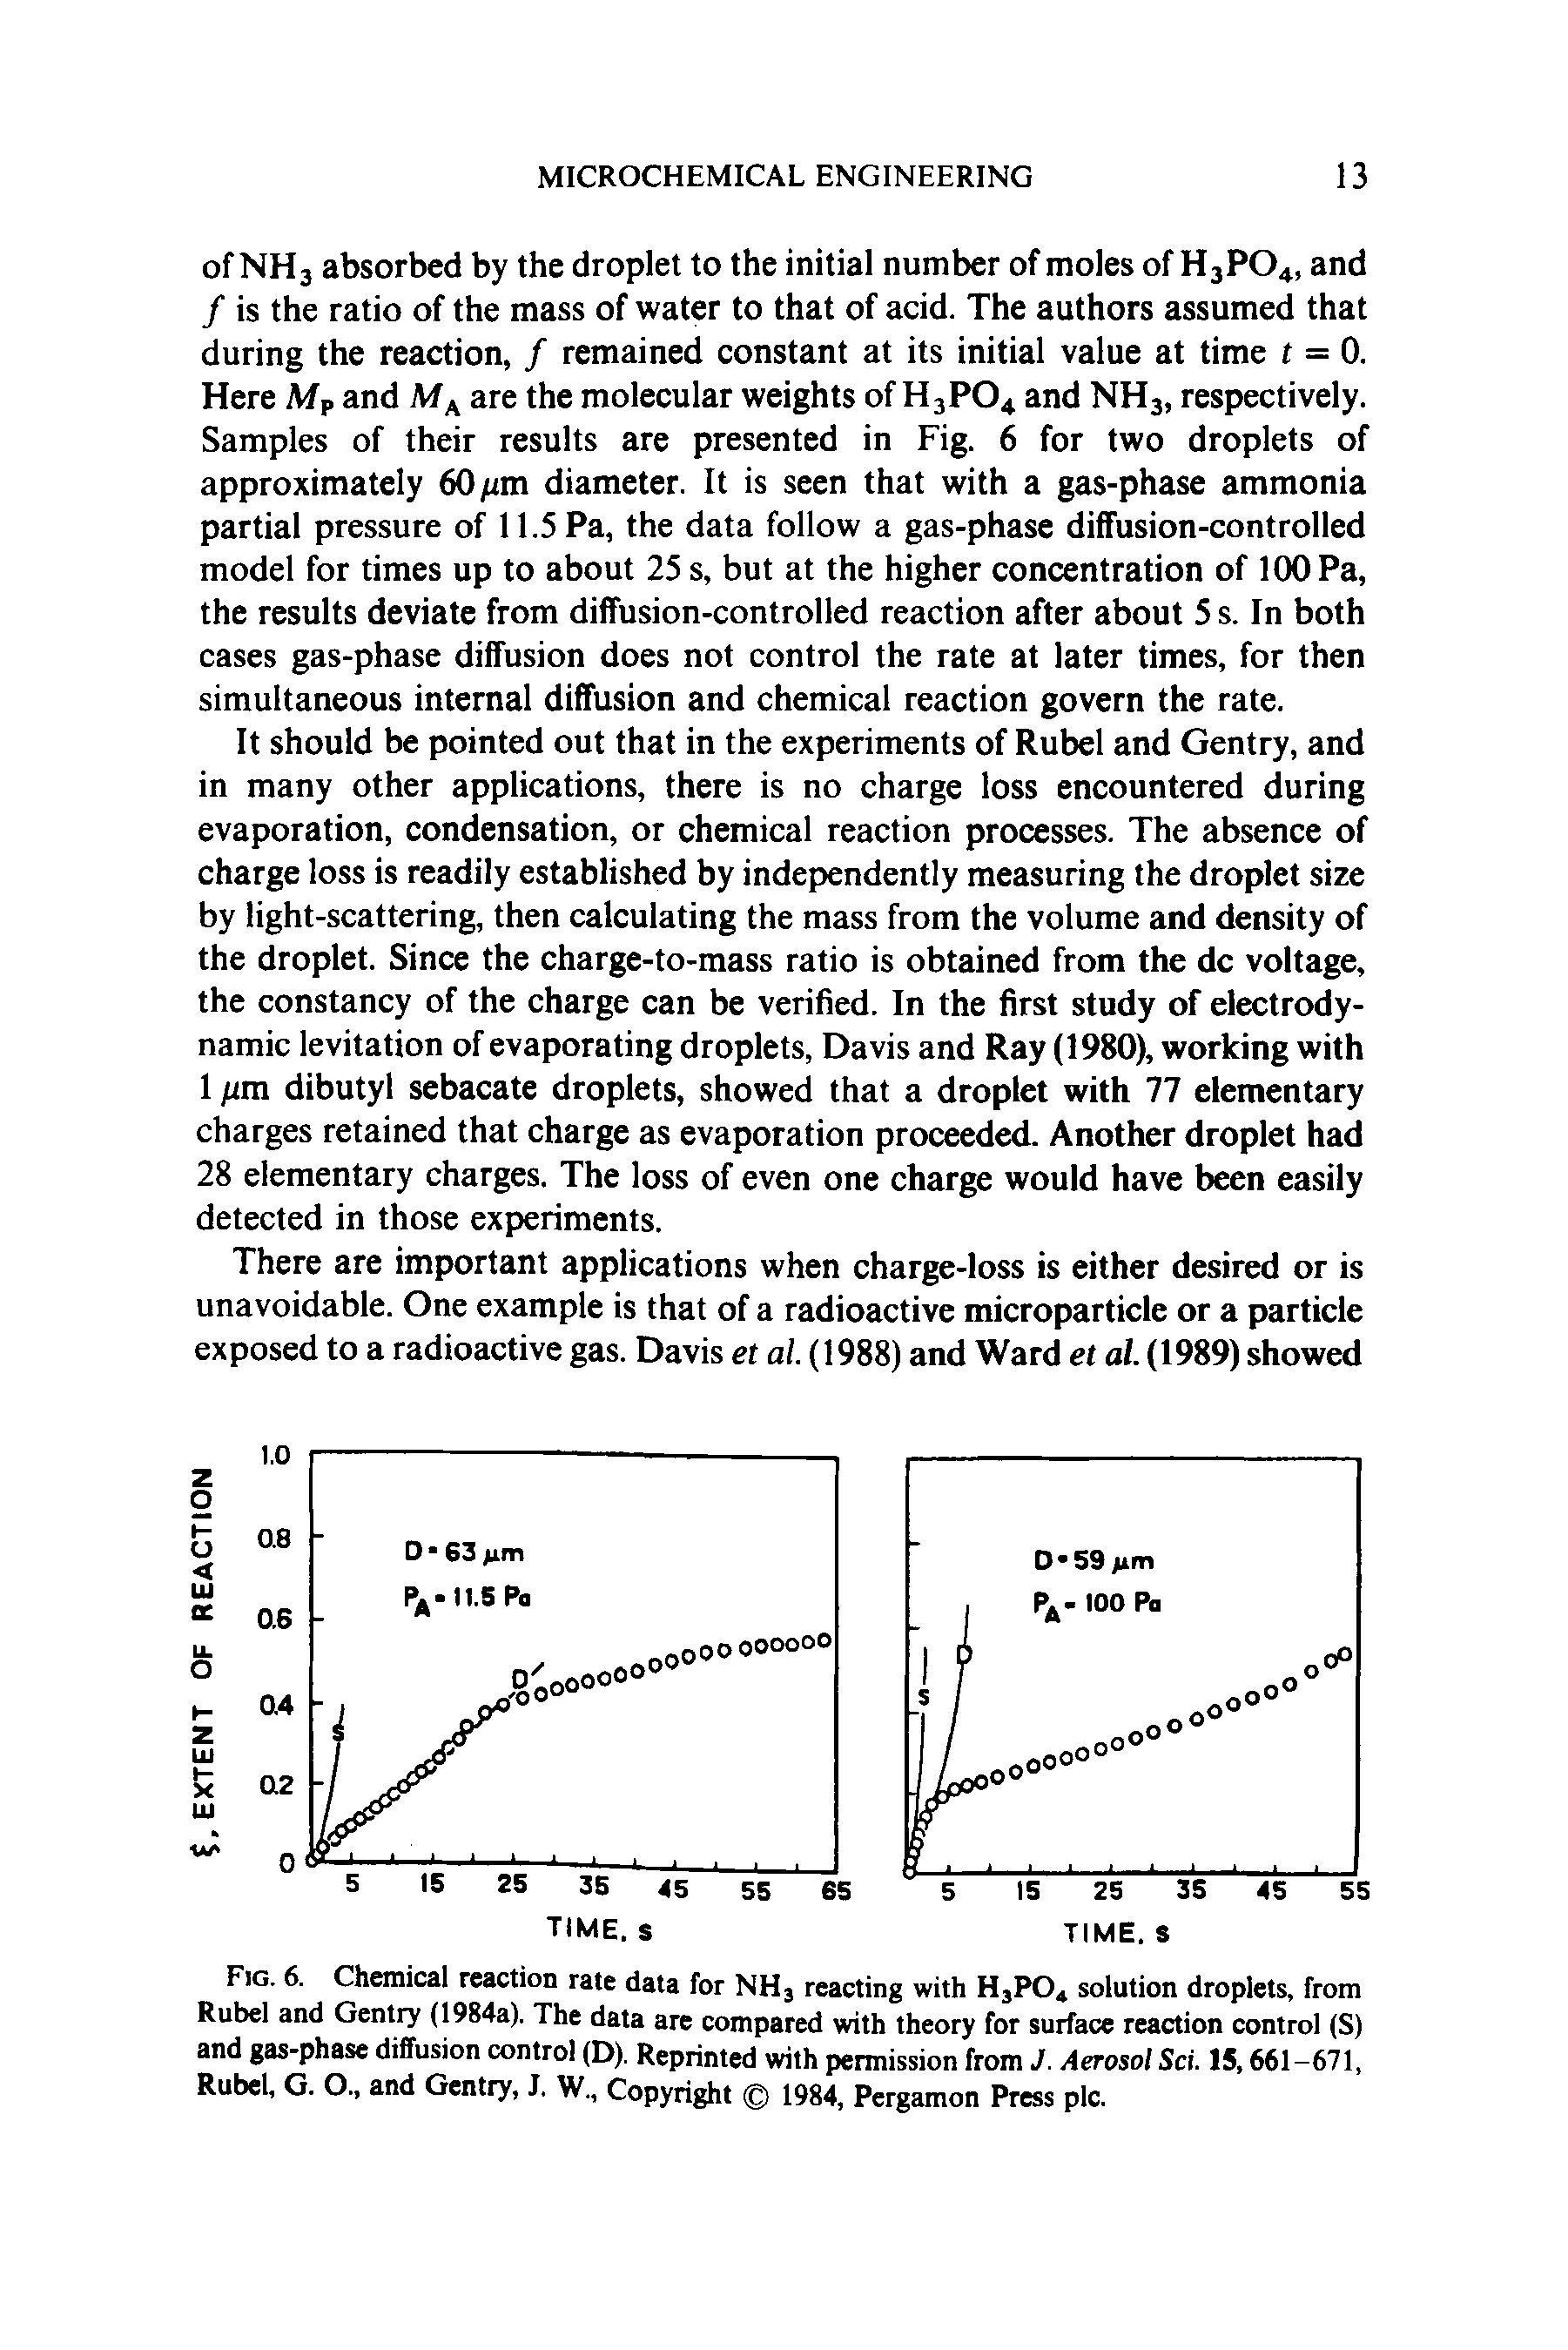 Fig. 6. Chemical reaction rate data for NH3 reacting with H3PO4 solution droplets, from Rubel and Gentry (1984a). The data are compared with theory for surface reaction control (S) and gas-phase diffusion control (D). Reprinted with permission from J. Aerosol Sci. 15,661-671, Rubel, G. O., and Gentry, J. W., Copyright 1984, Pergamon Press pic.